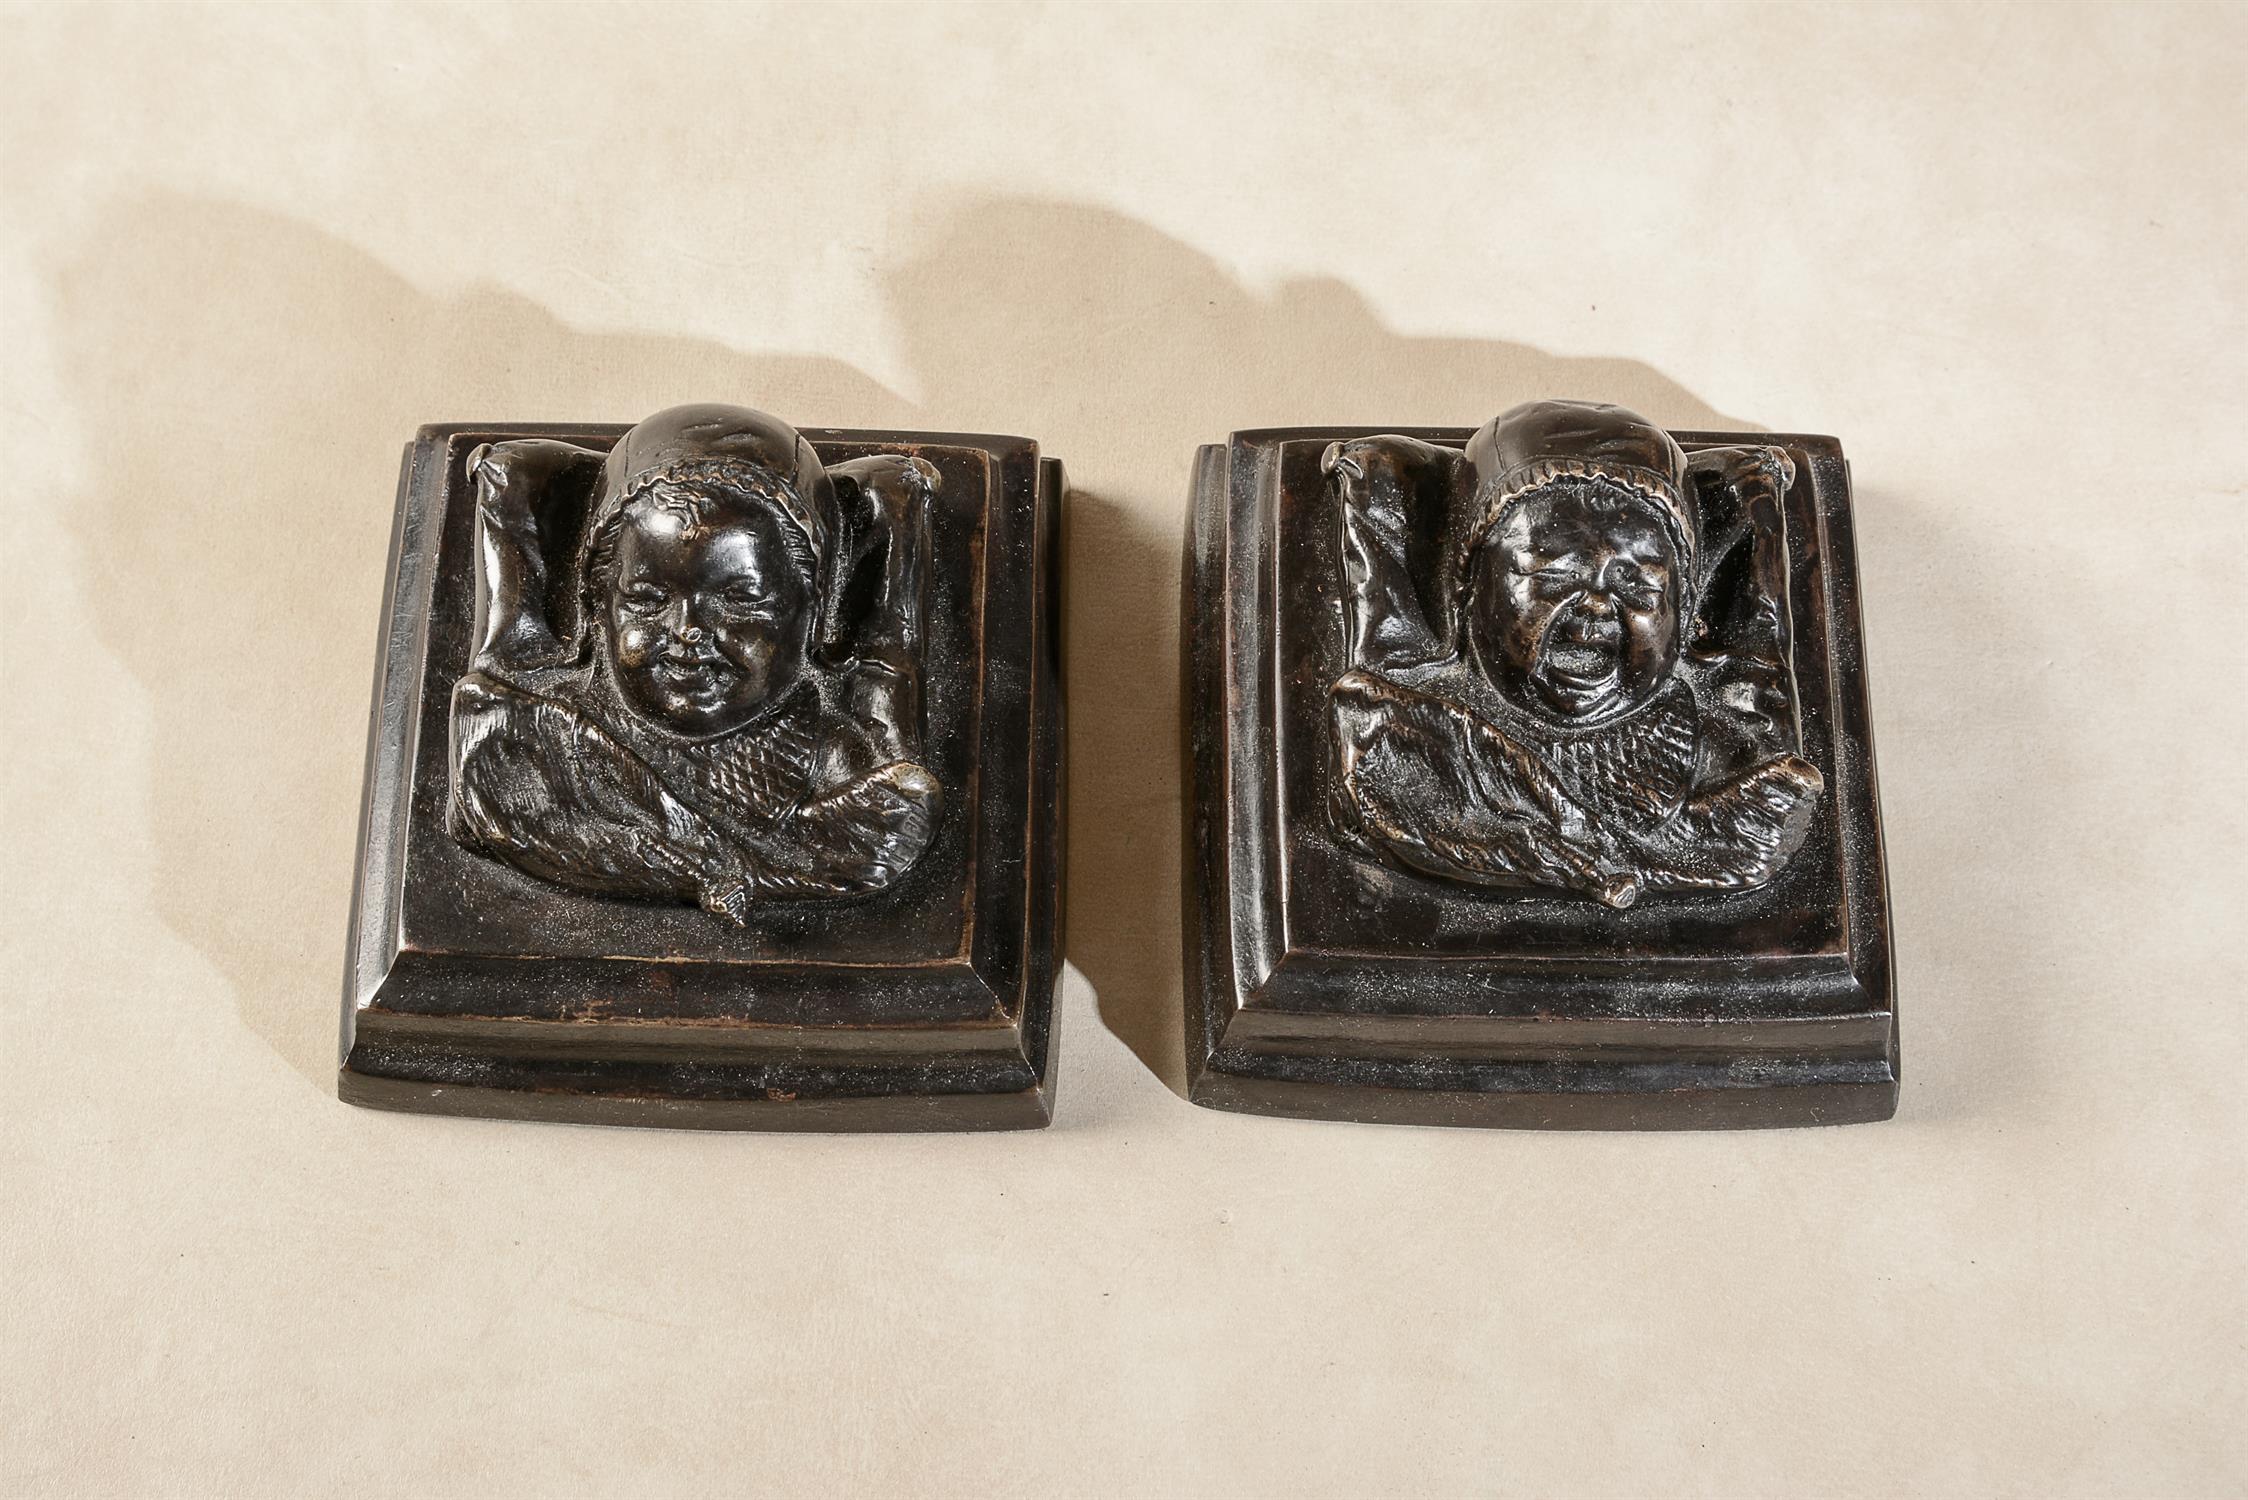 Contemporary School, bronze group of nursing mother and child - Image 3 of 3